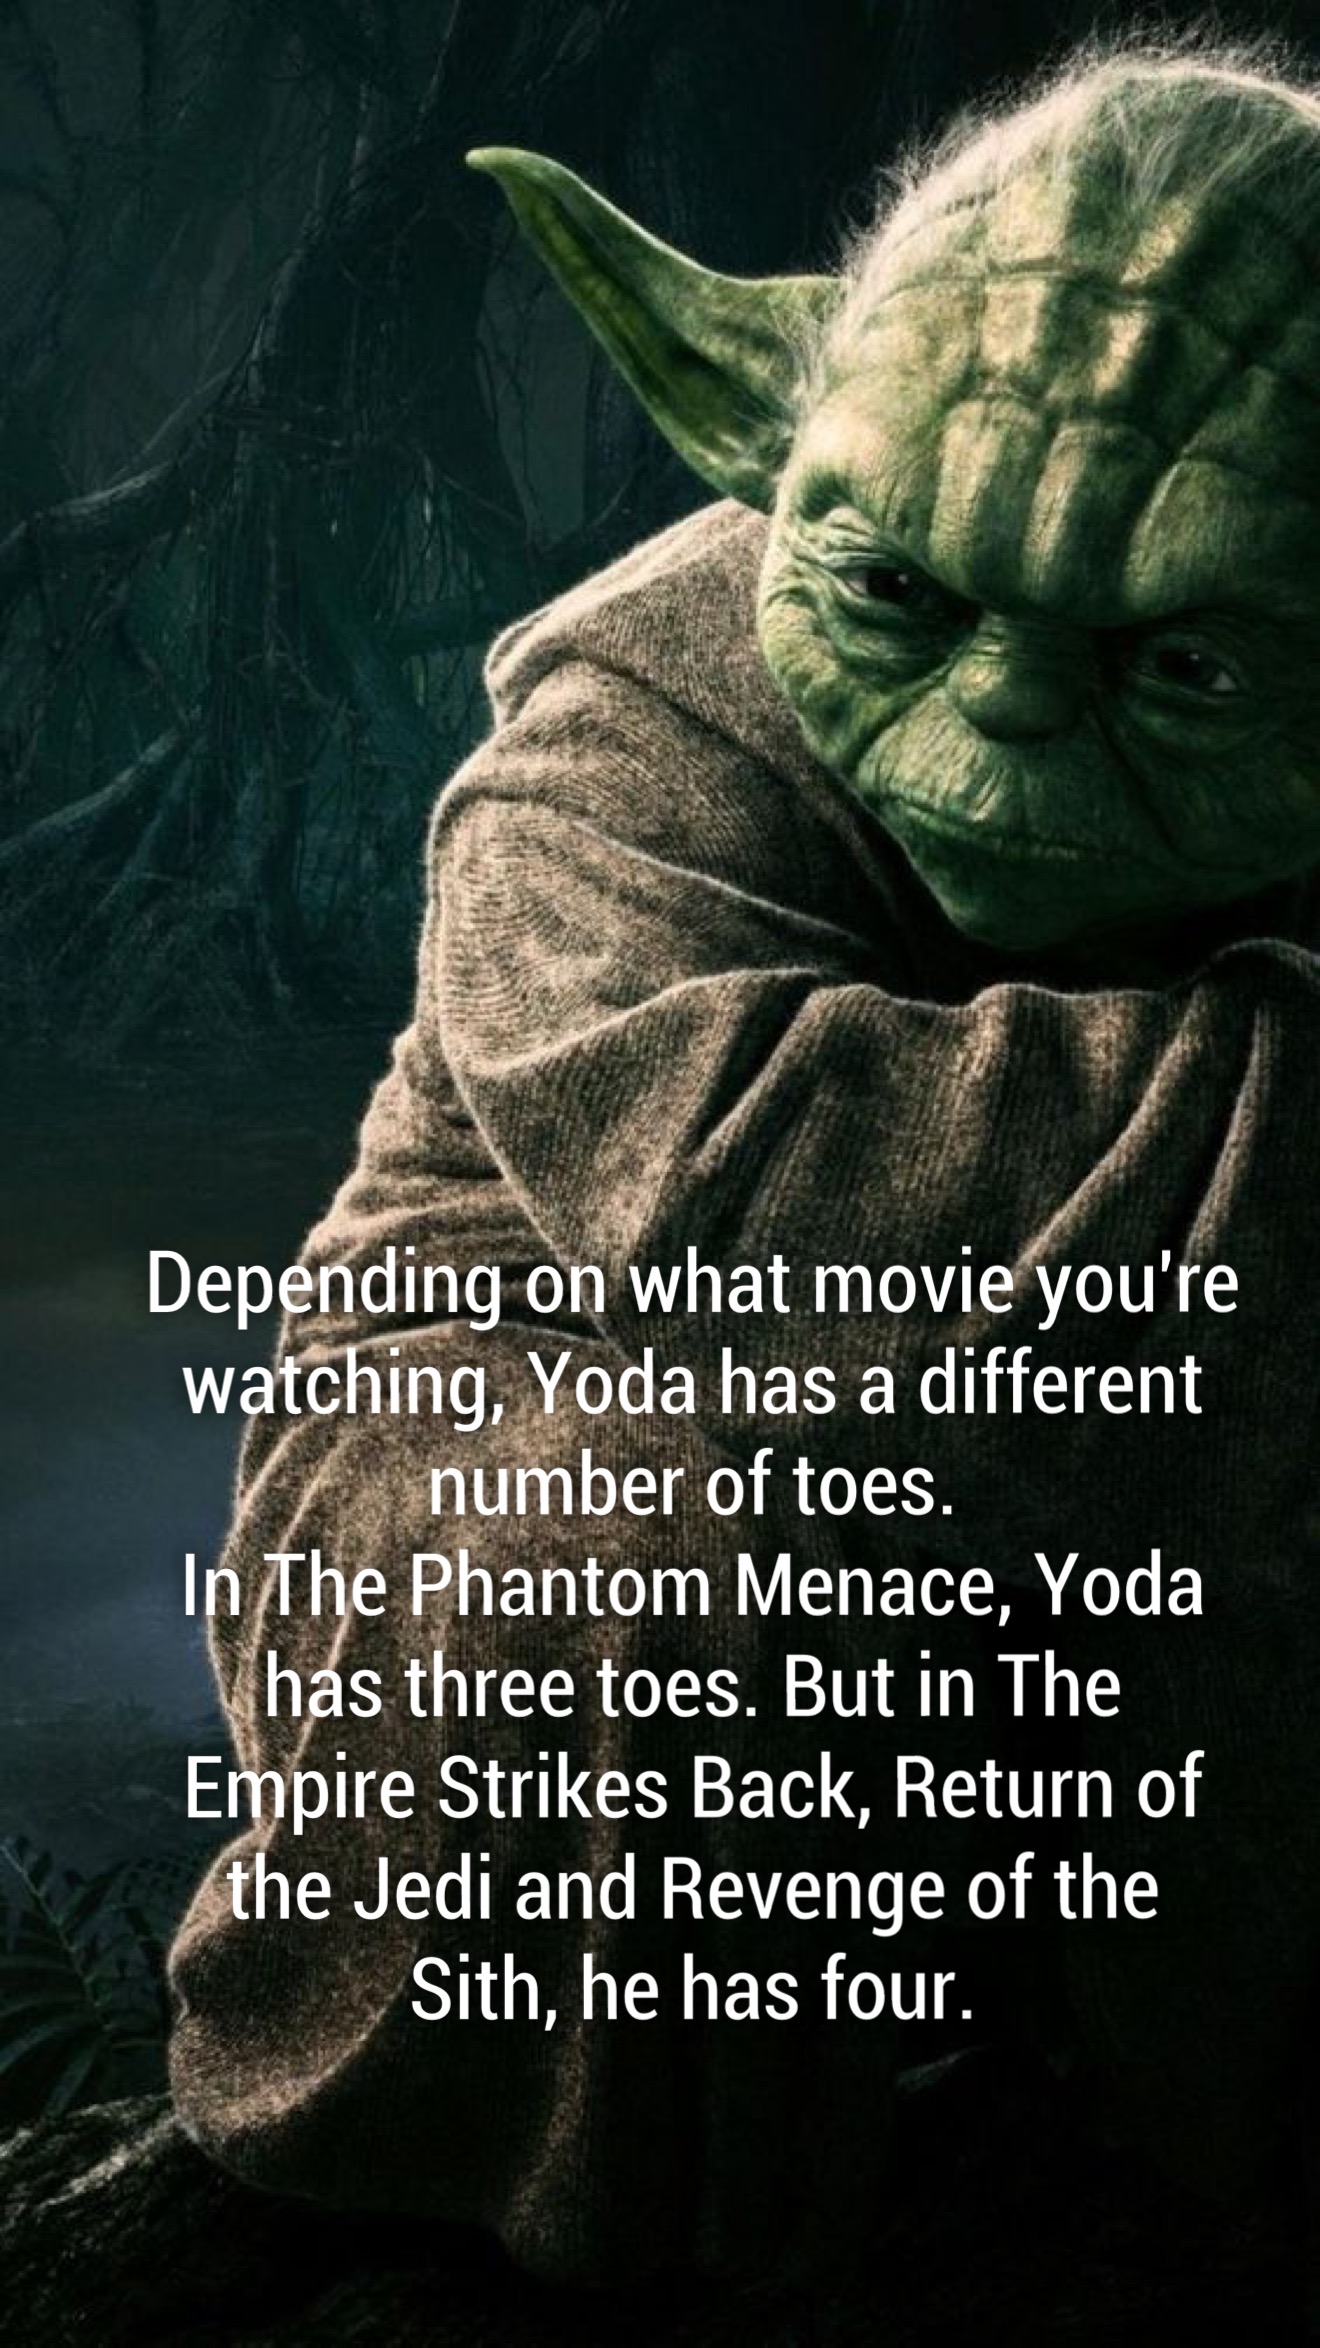 Depending on what movie you're watching, Yoda has a different number of toes. In The Phantom Menace, Yoda V has three toes. But in the Empire Strikes Back, Return of the Jedi and Revenge of the Sith, he has four.